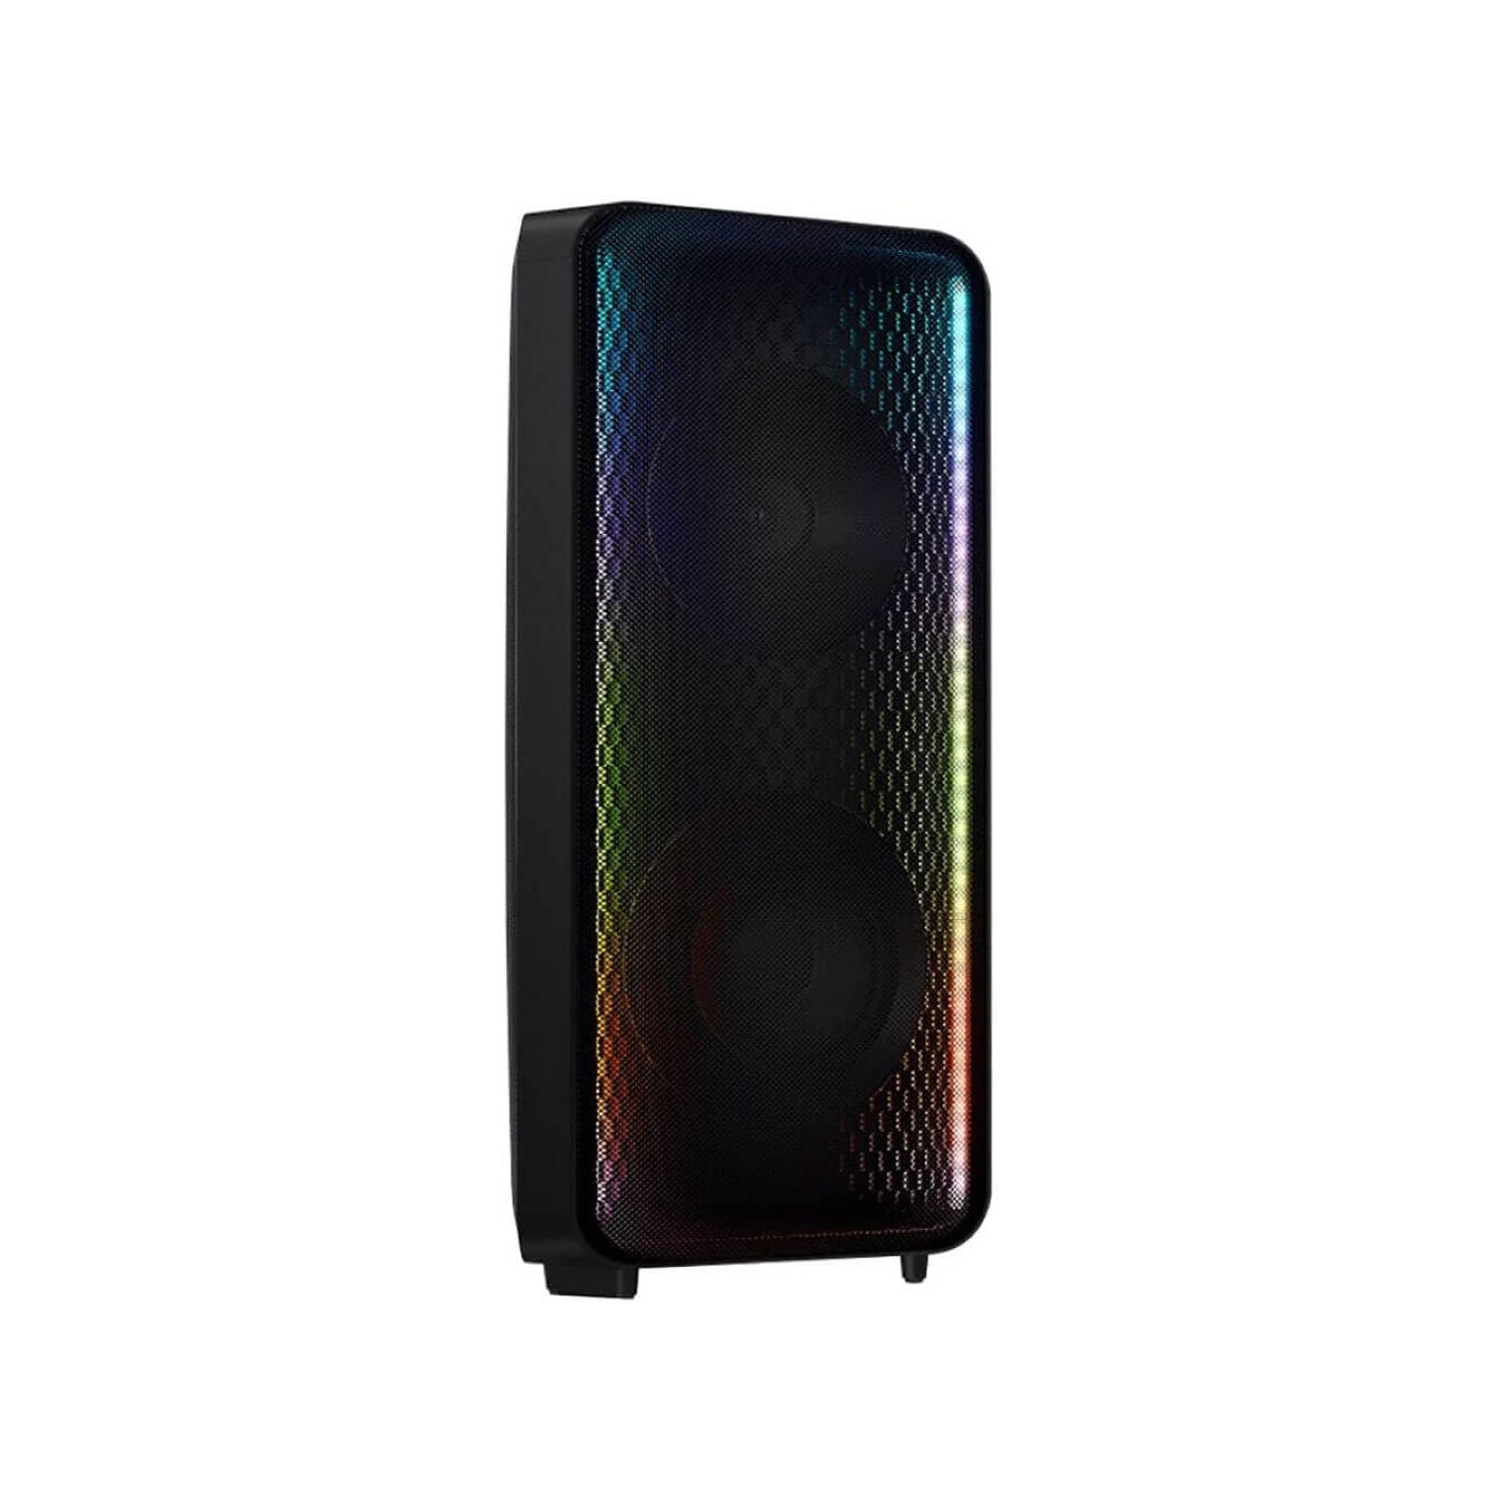 Open Box - SAMSUNG MX-ST50B Sound Tower High Power Audio 240W Floor Standing Speaker Bi-Directional Sound Built-in Battery IPX5 Water Resistant Party Light- 10/10 Condition